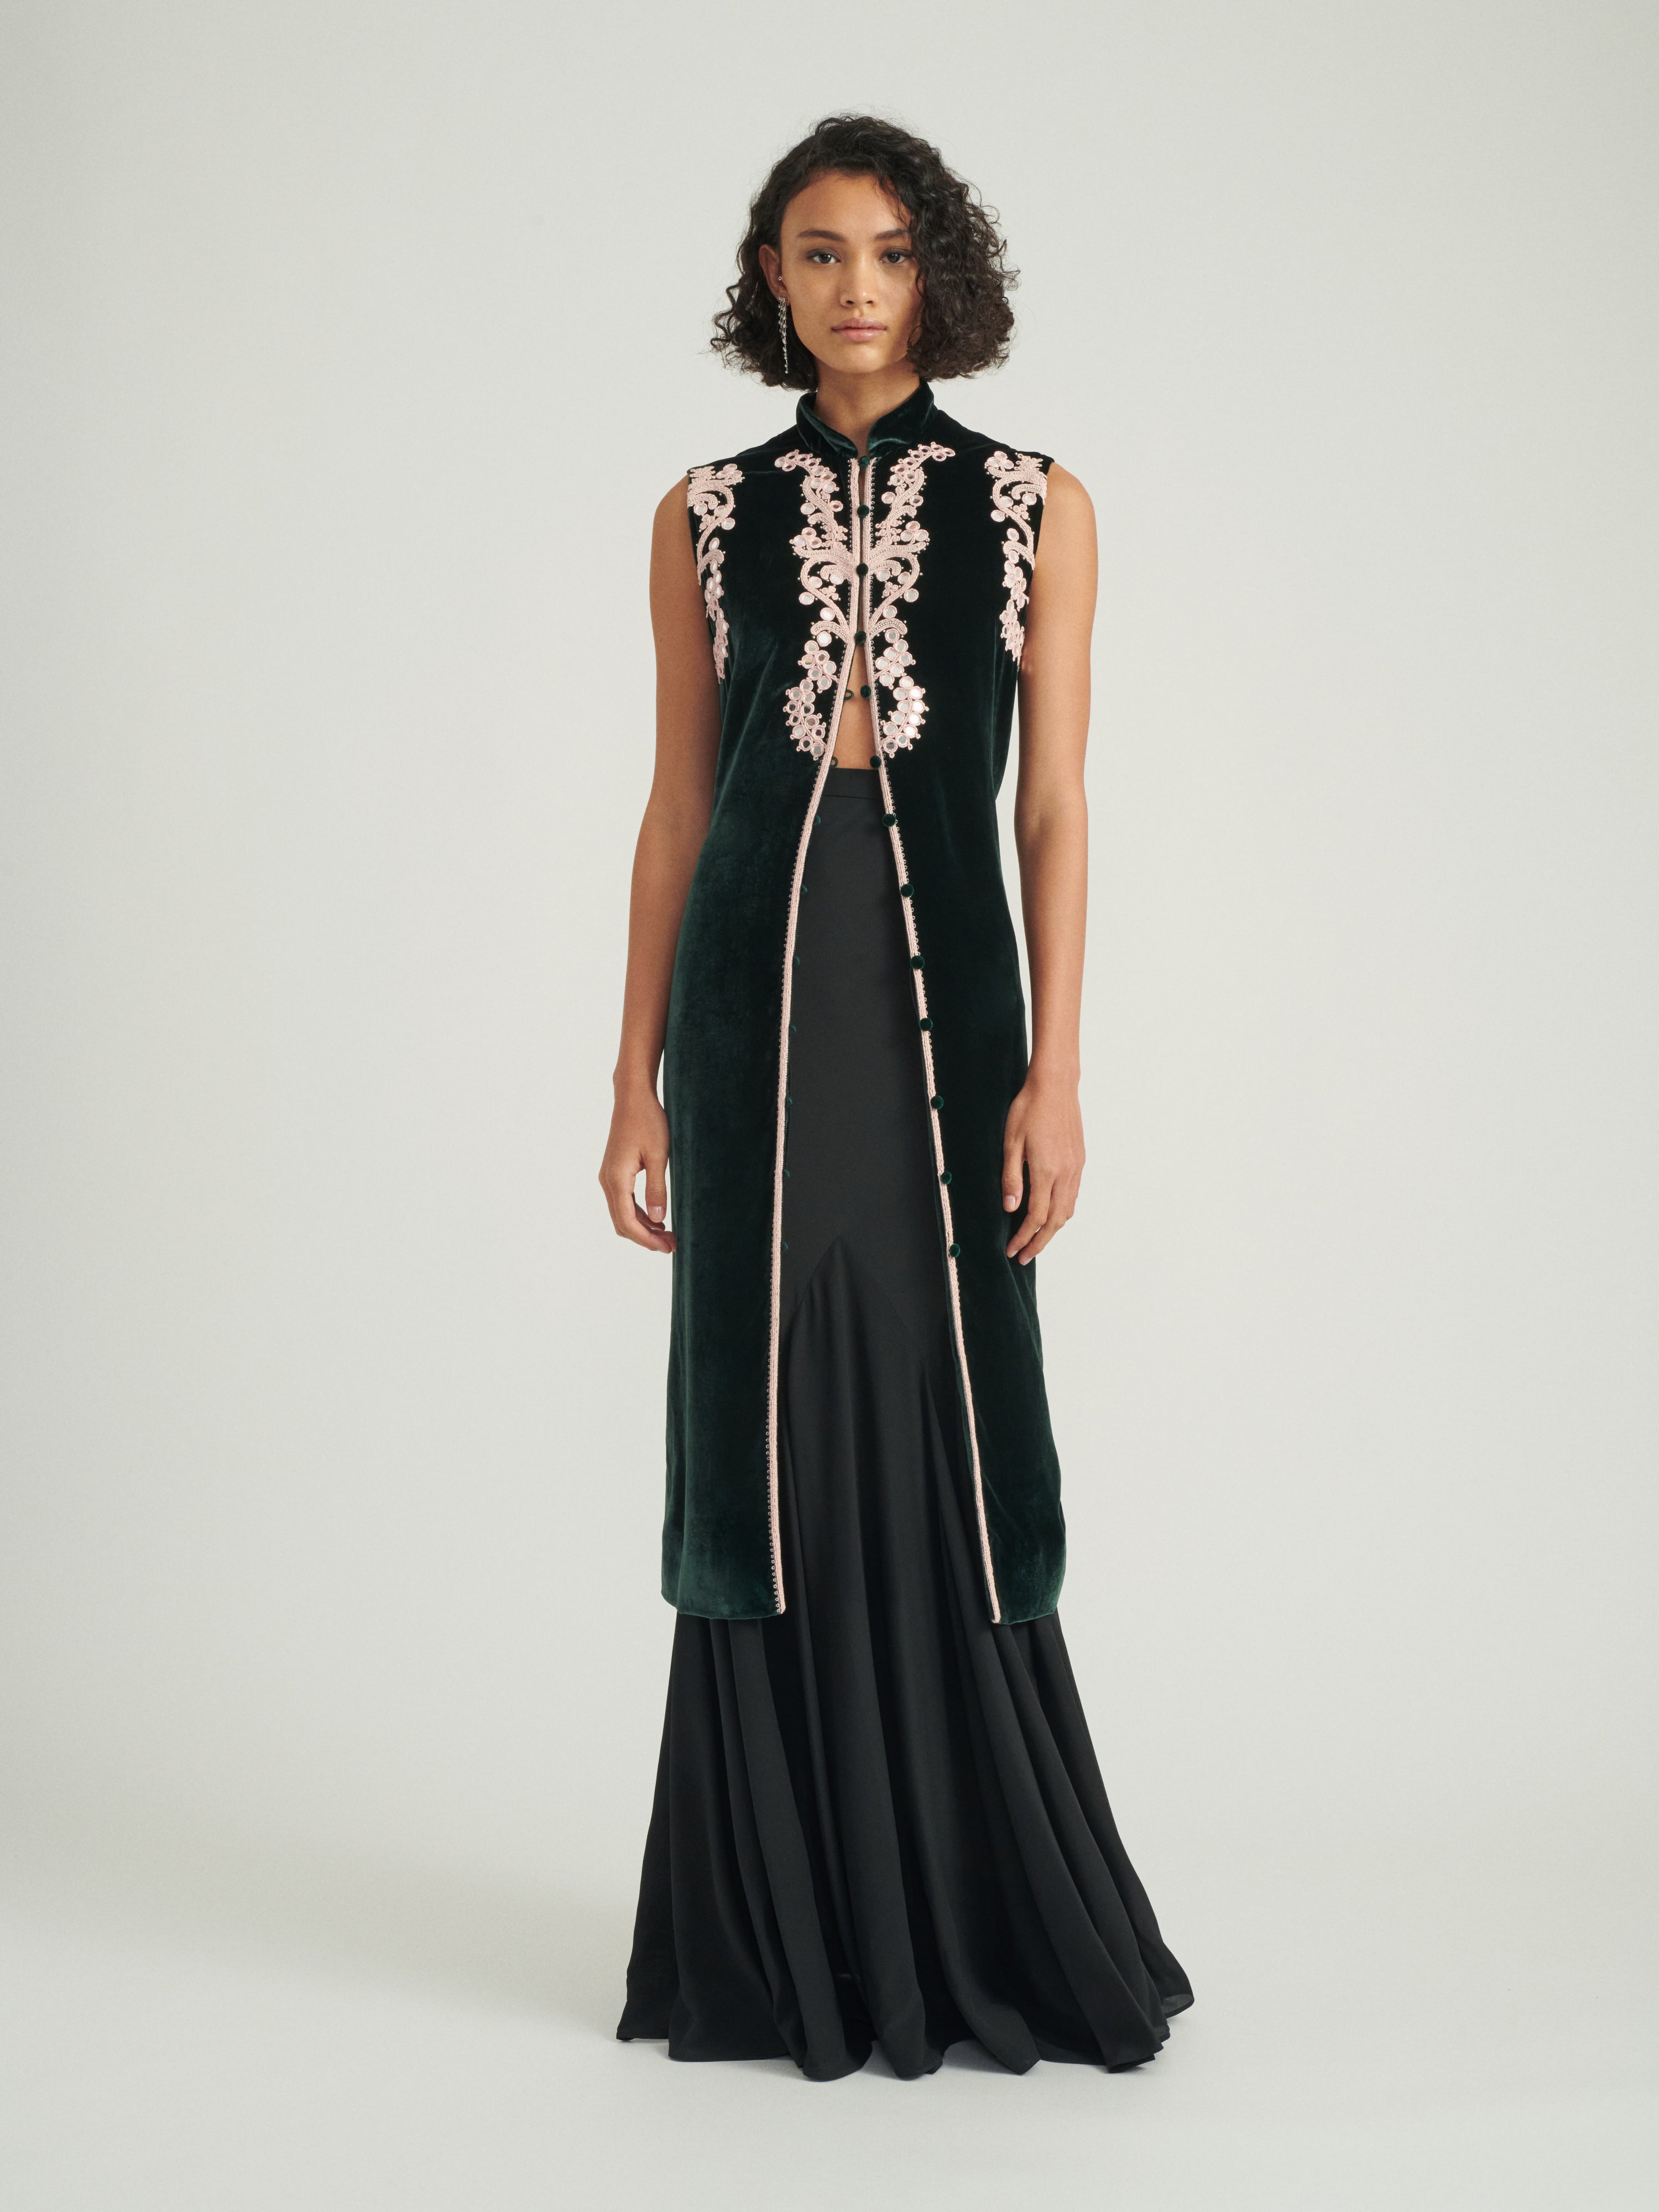 Amari B Robe in Forest Green with Cordwork